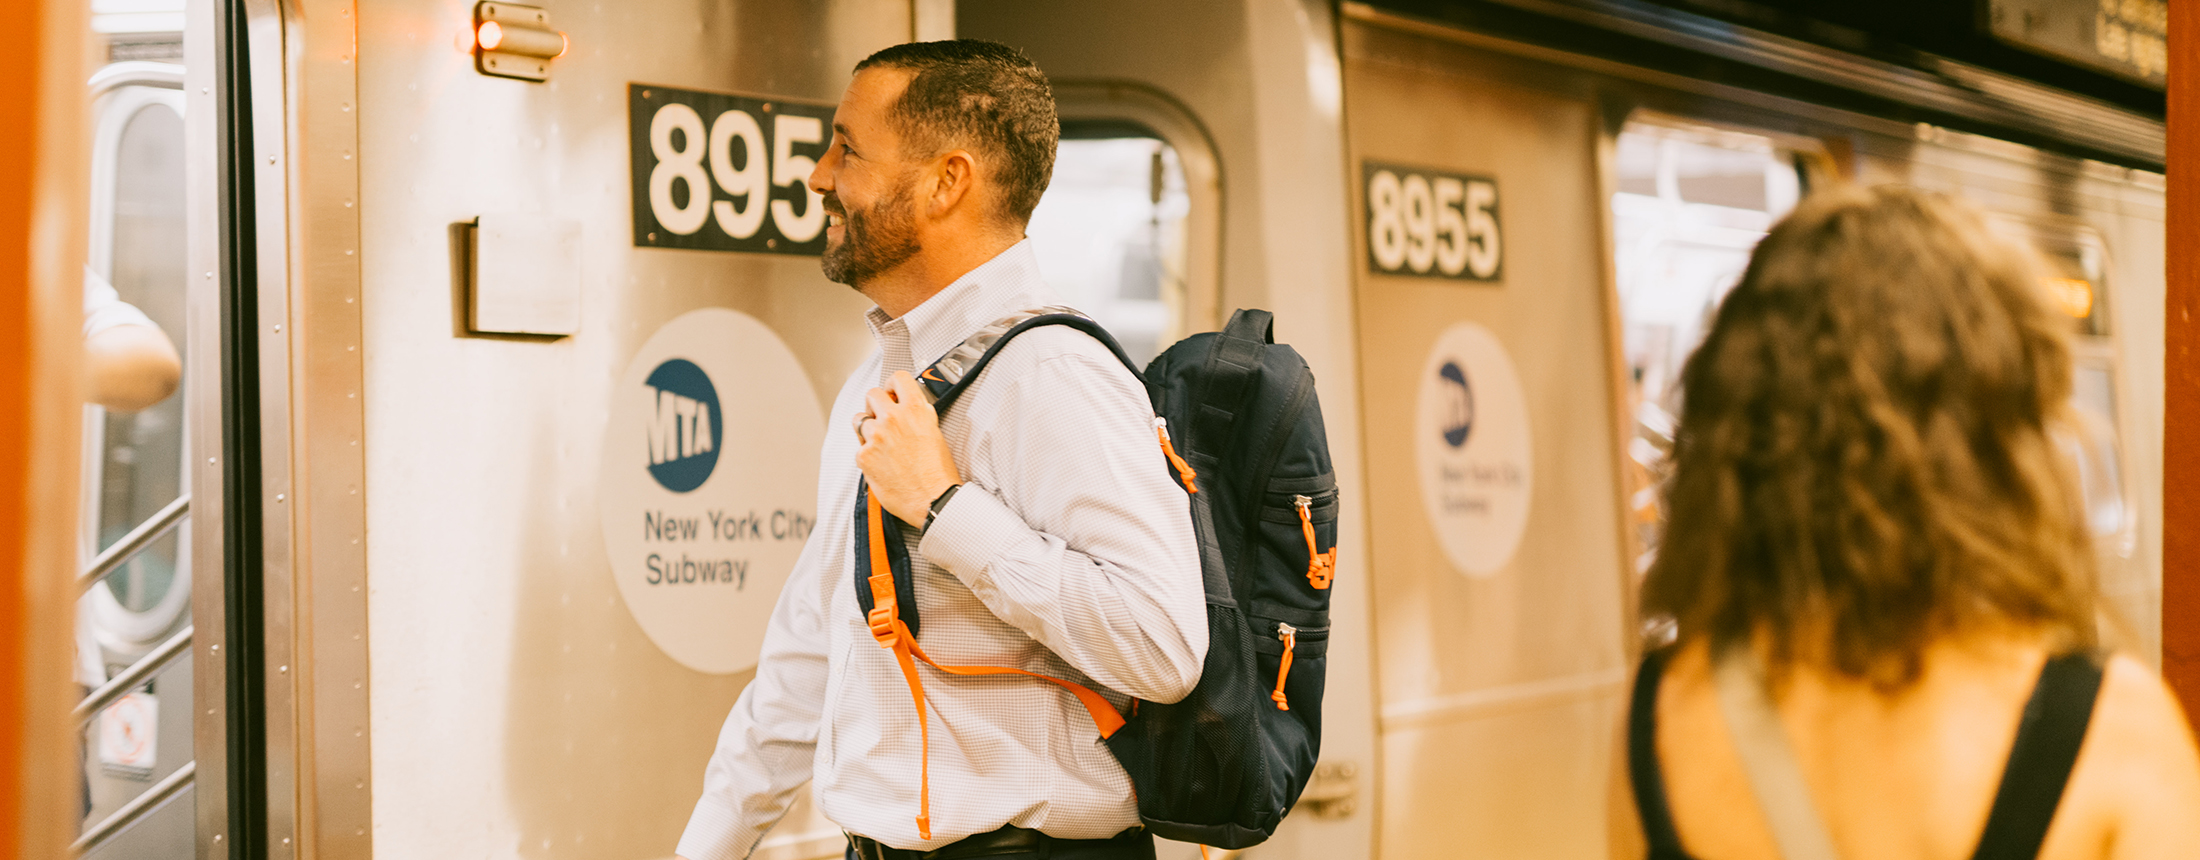 student with a syracuse backpack about to get on the new york city subway